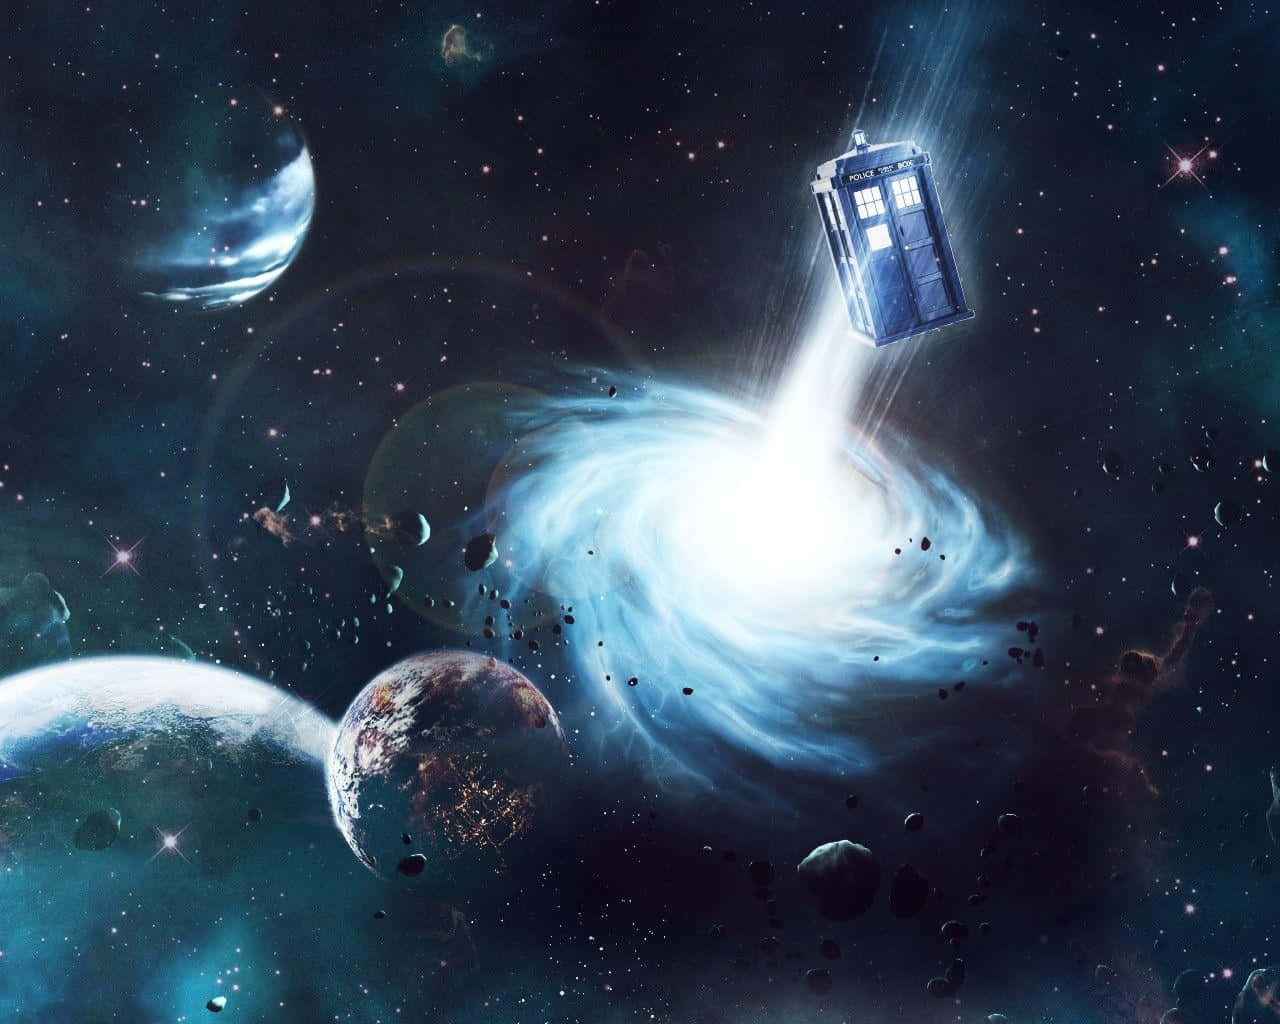 Experience greatness with the iconic TARDIS Wallpaper